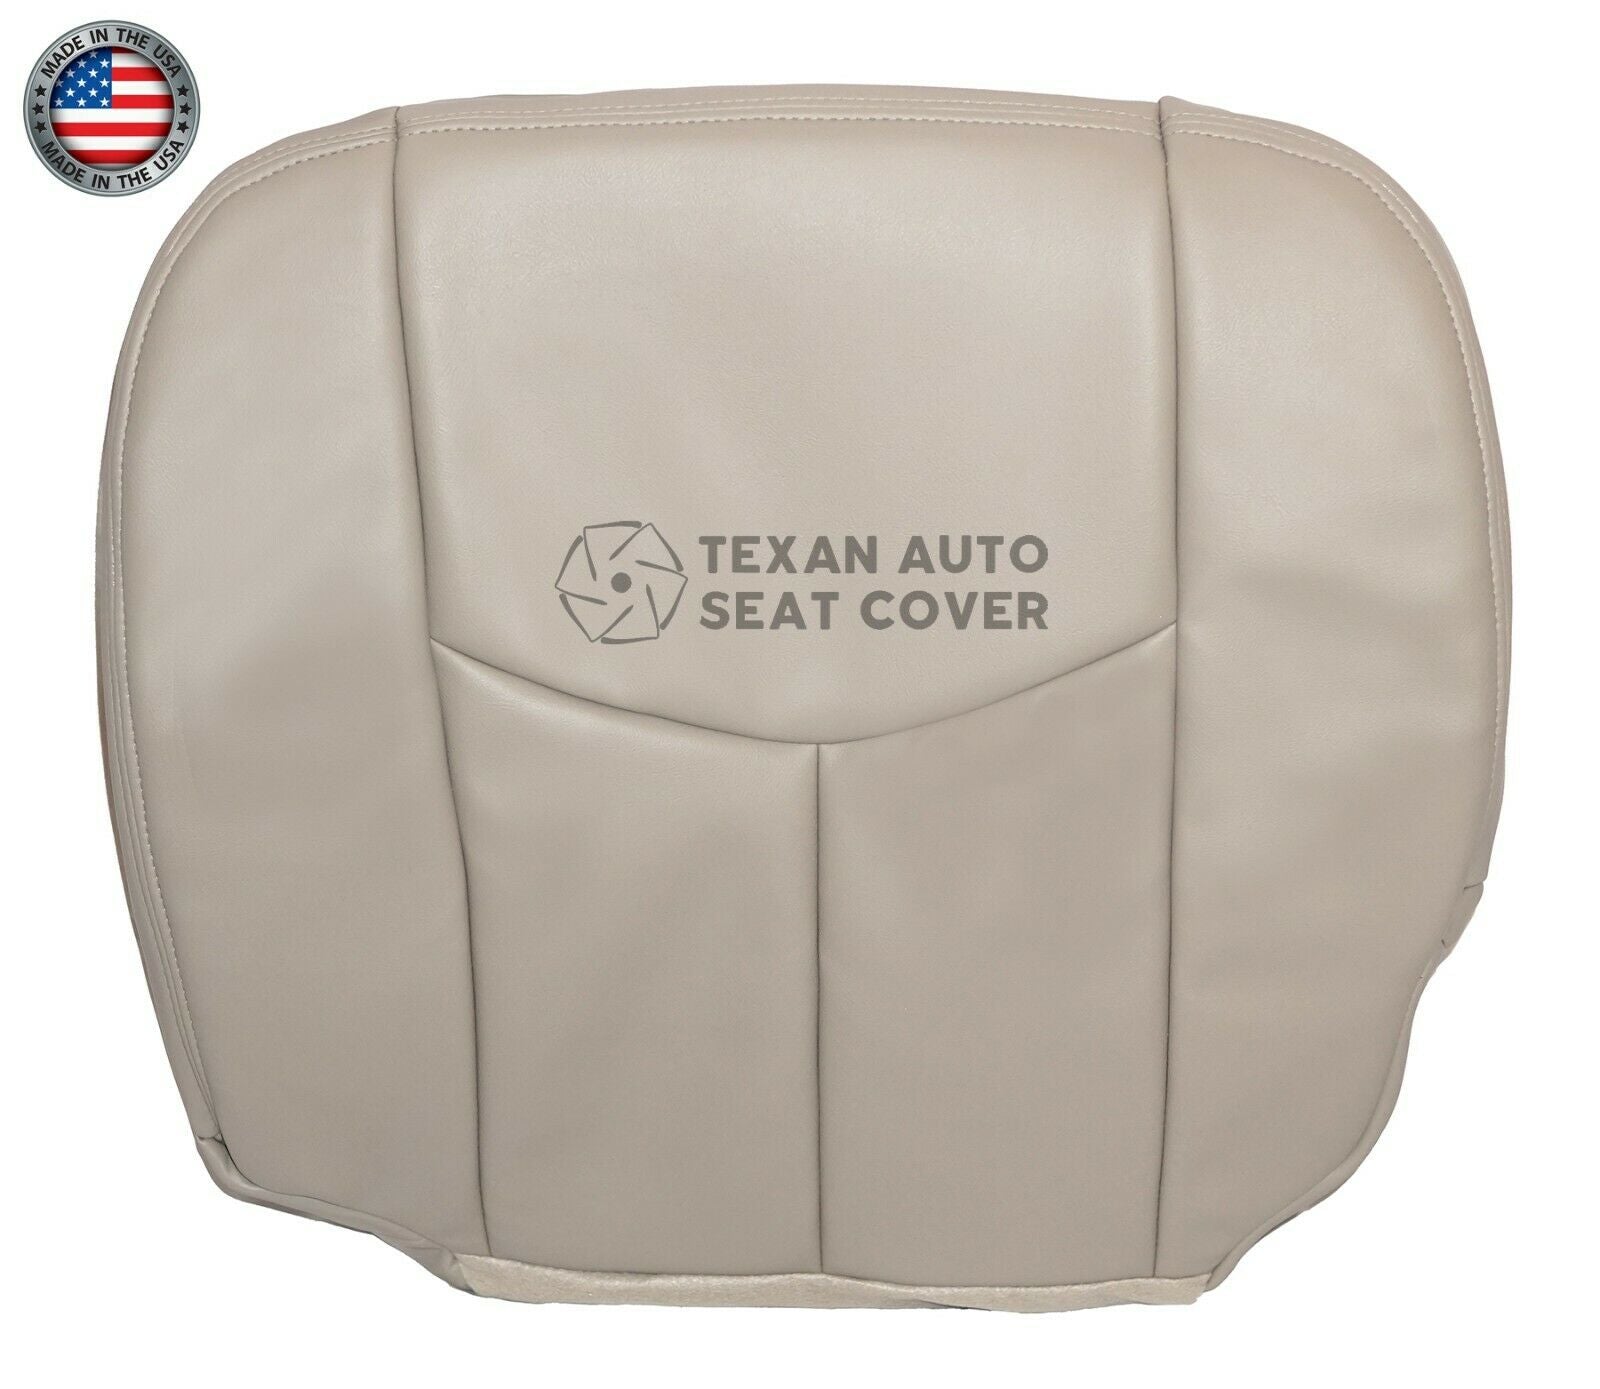 Fits 2005, 2006 Chevy Avalanche 1500 2500 LT LS Z71, Z66 Passenger Side Bottom Synthetic Leather Replacement Seat Cover Shale